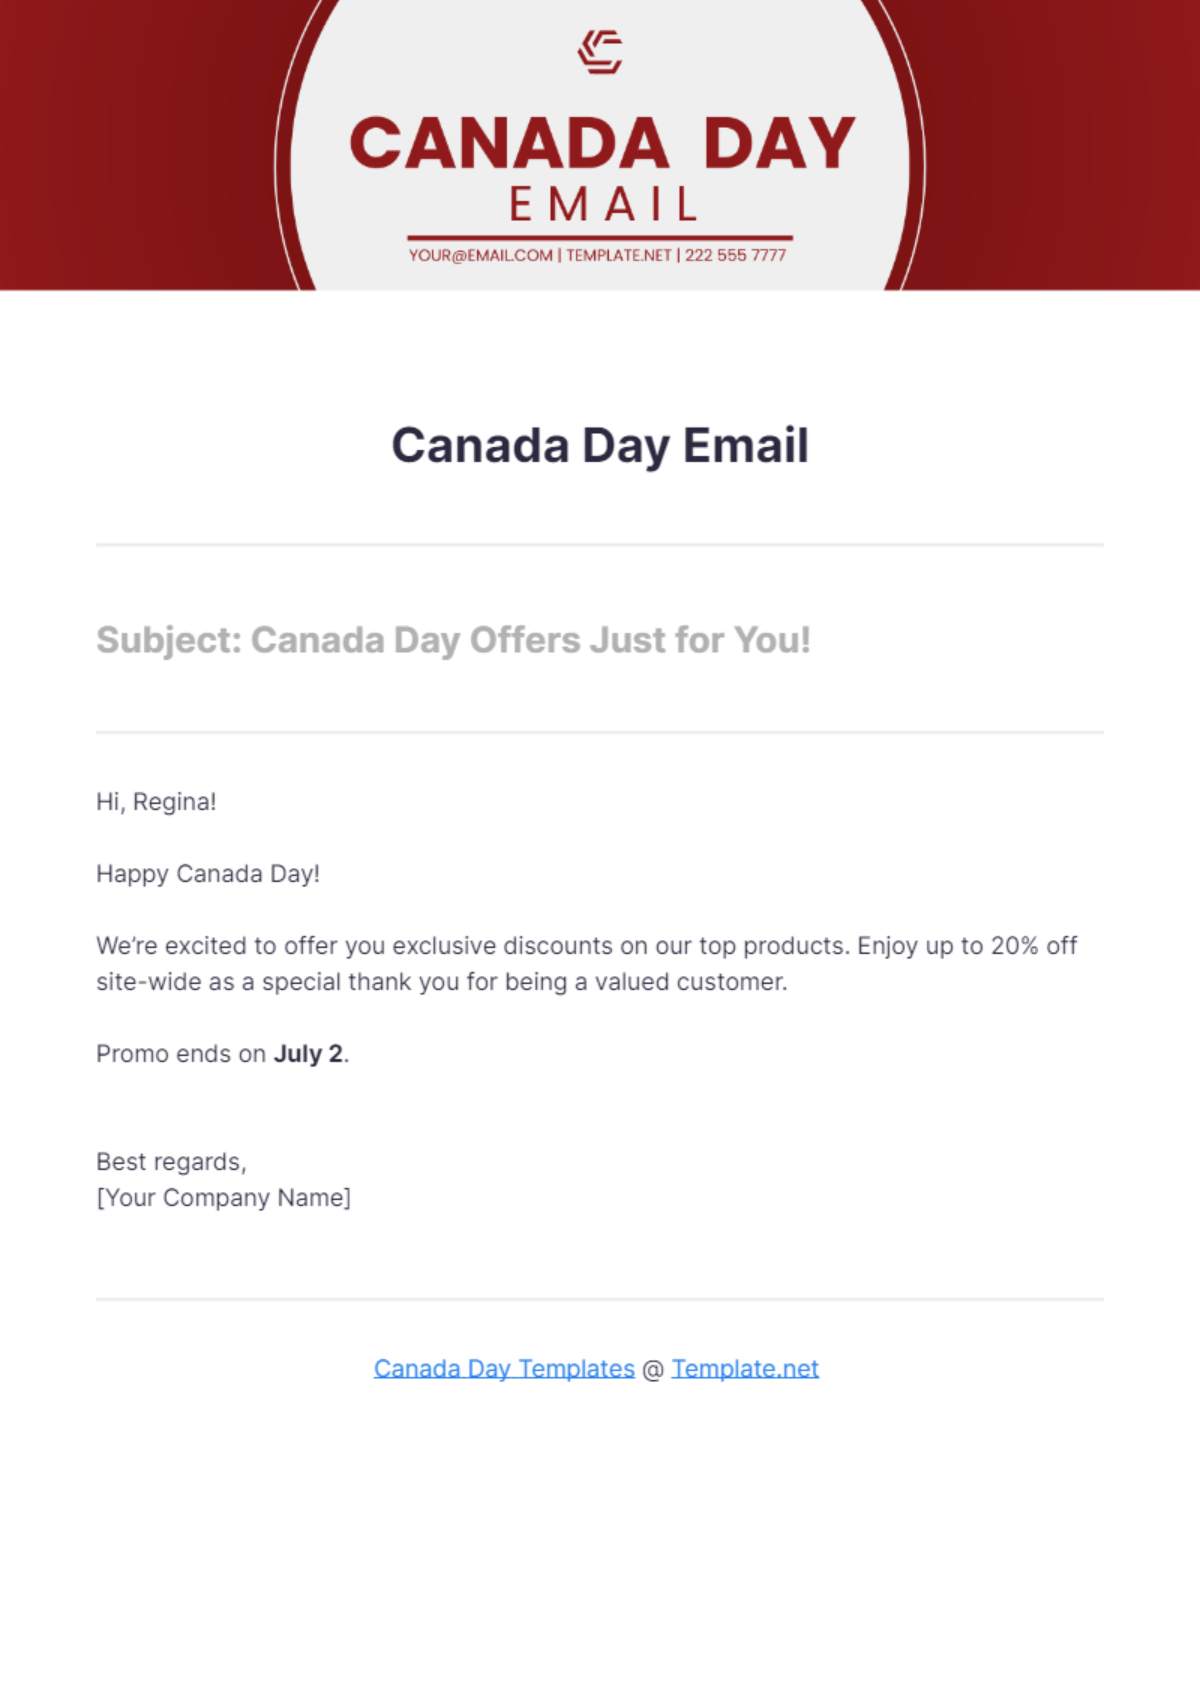 Canada Day Email Template